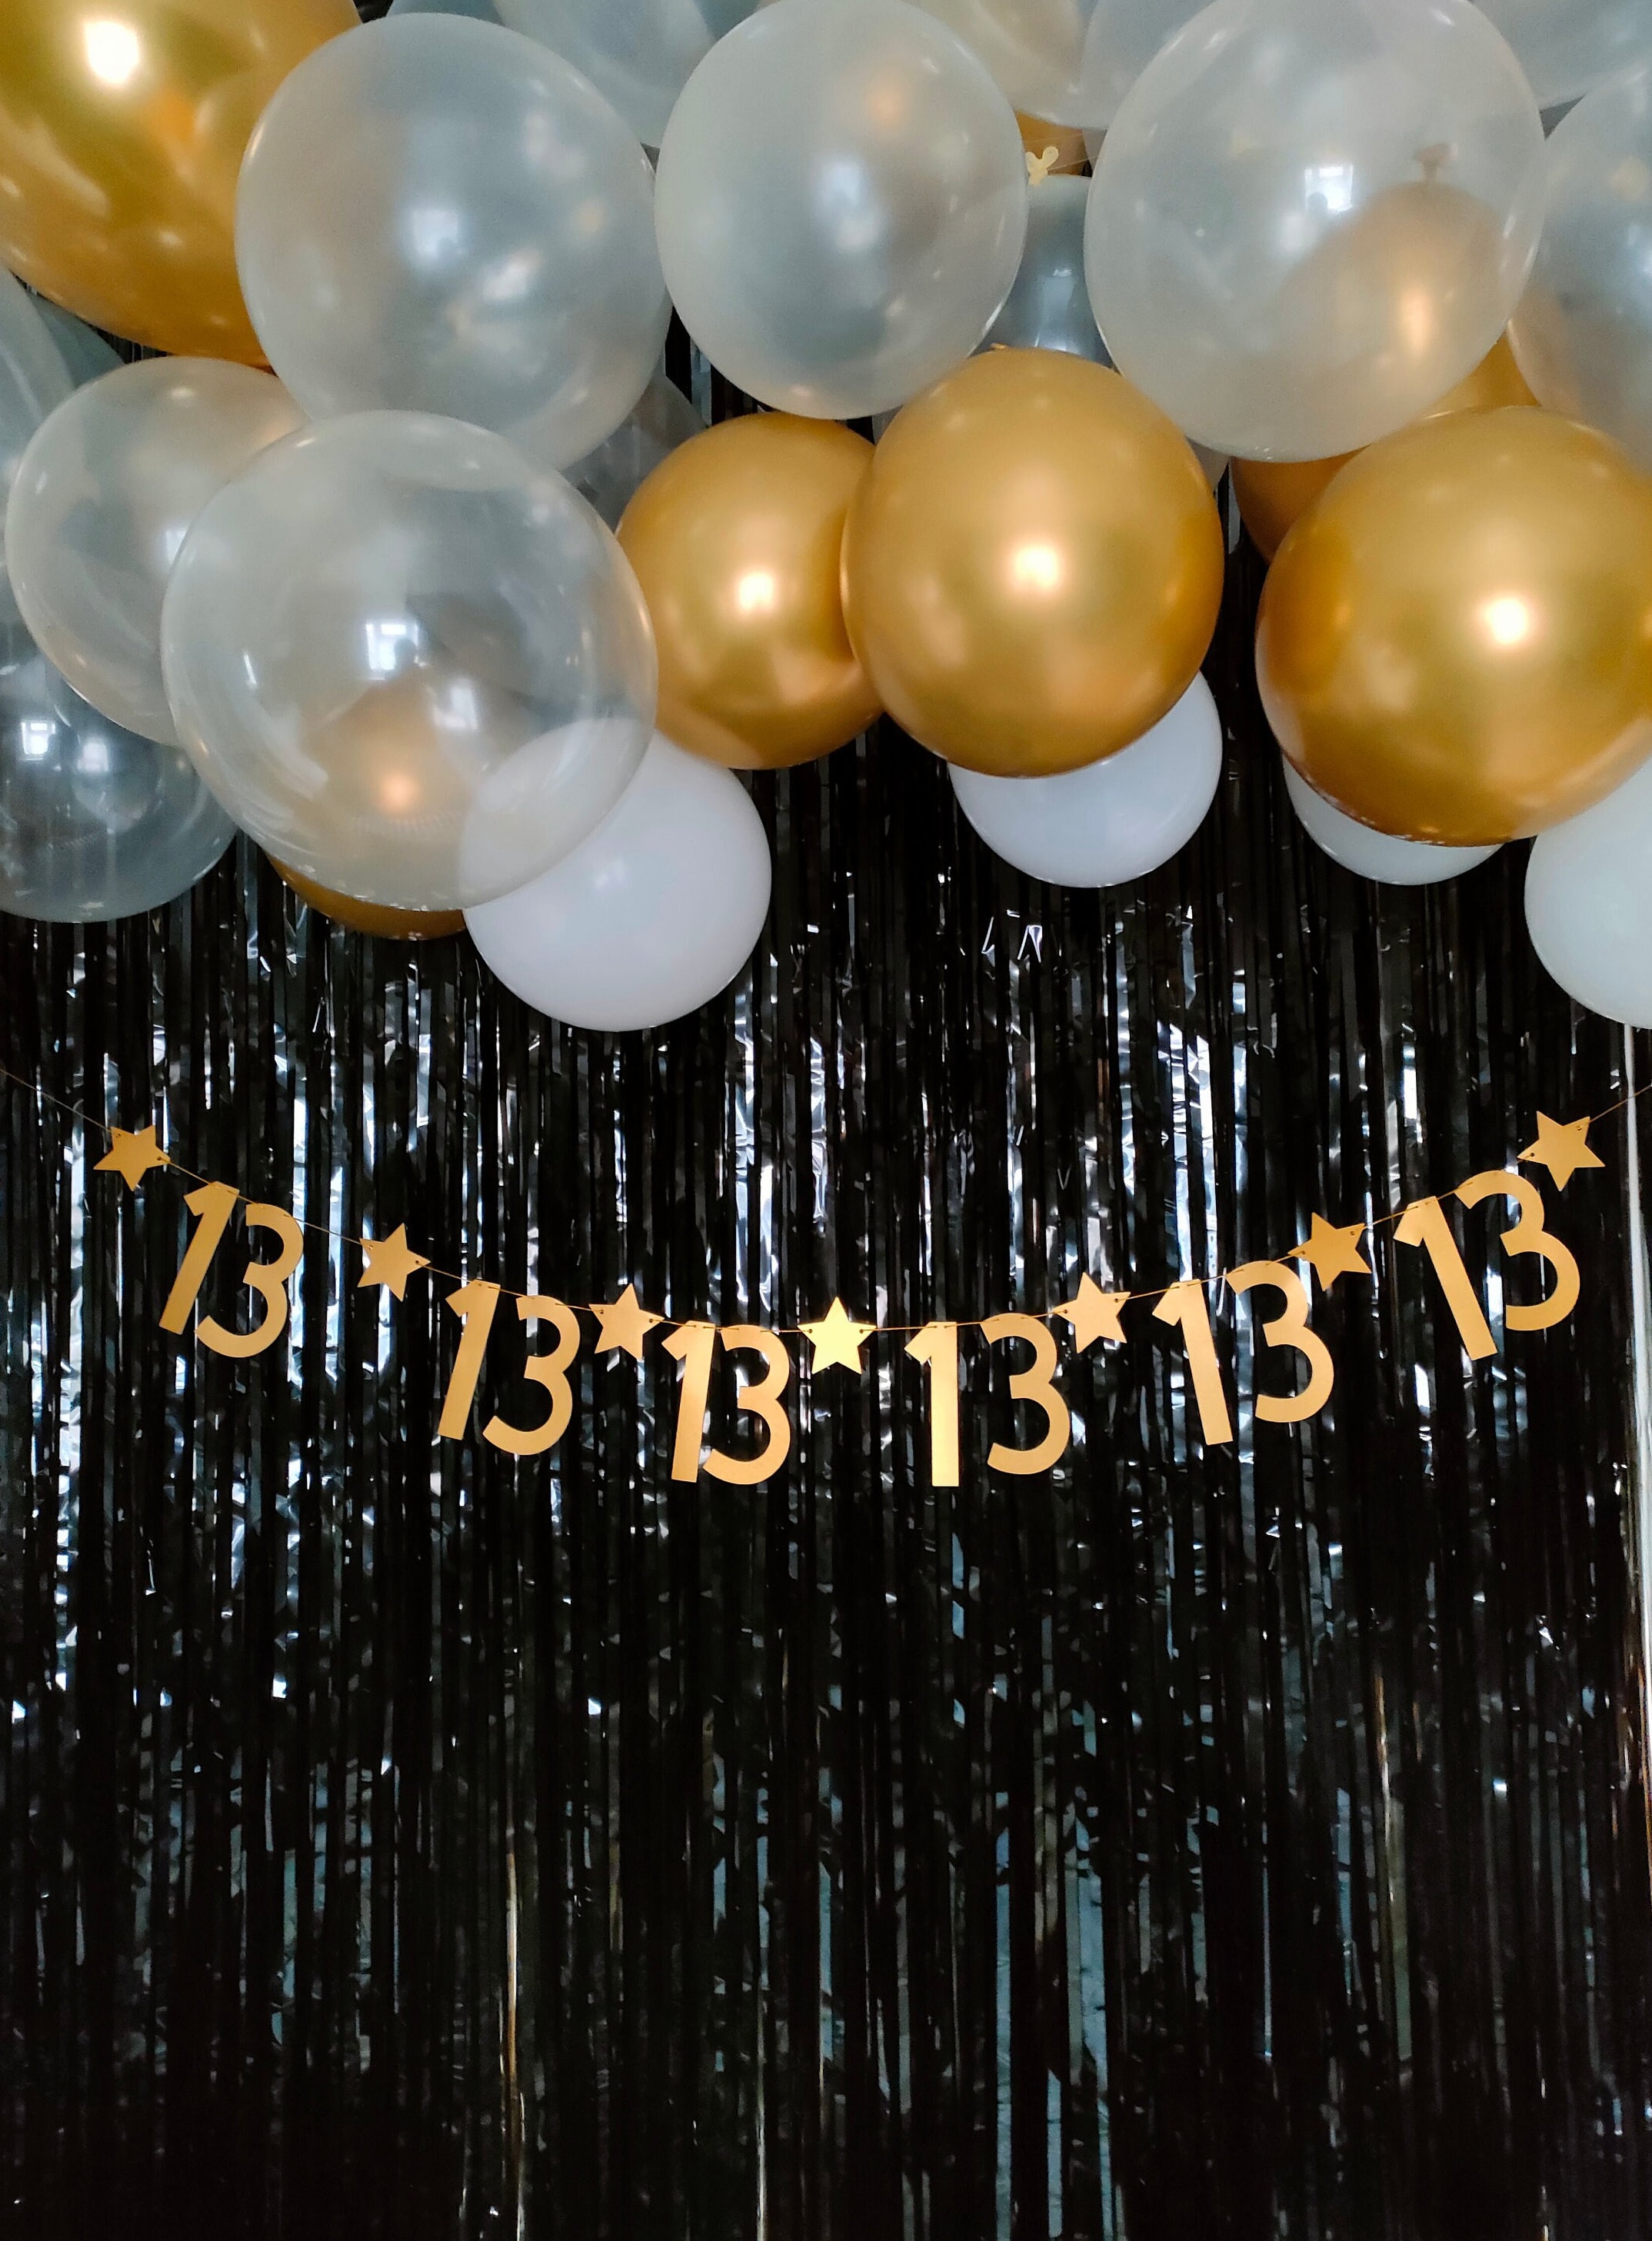 Gold Silver and Black Birthday Decorations Background&Balloons Arch Garland  Kit,Crown ,HAPPY BIRTHDAY Banner,Gold Curtains,Balloon gift box,for Men